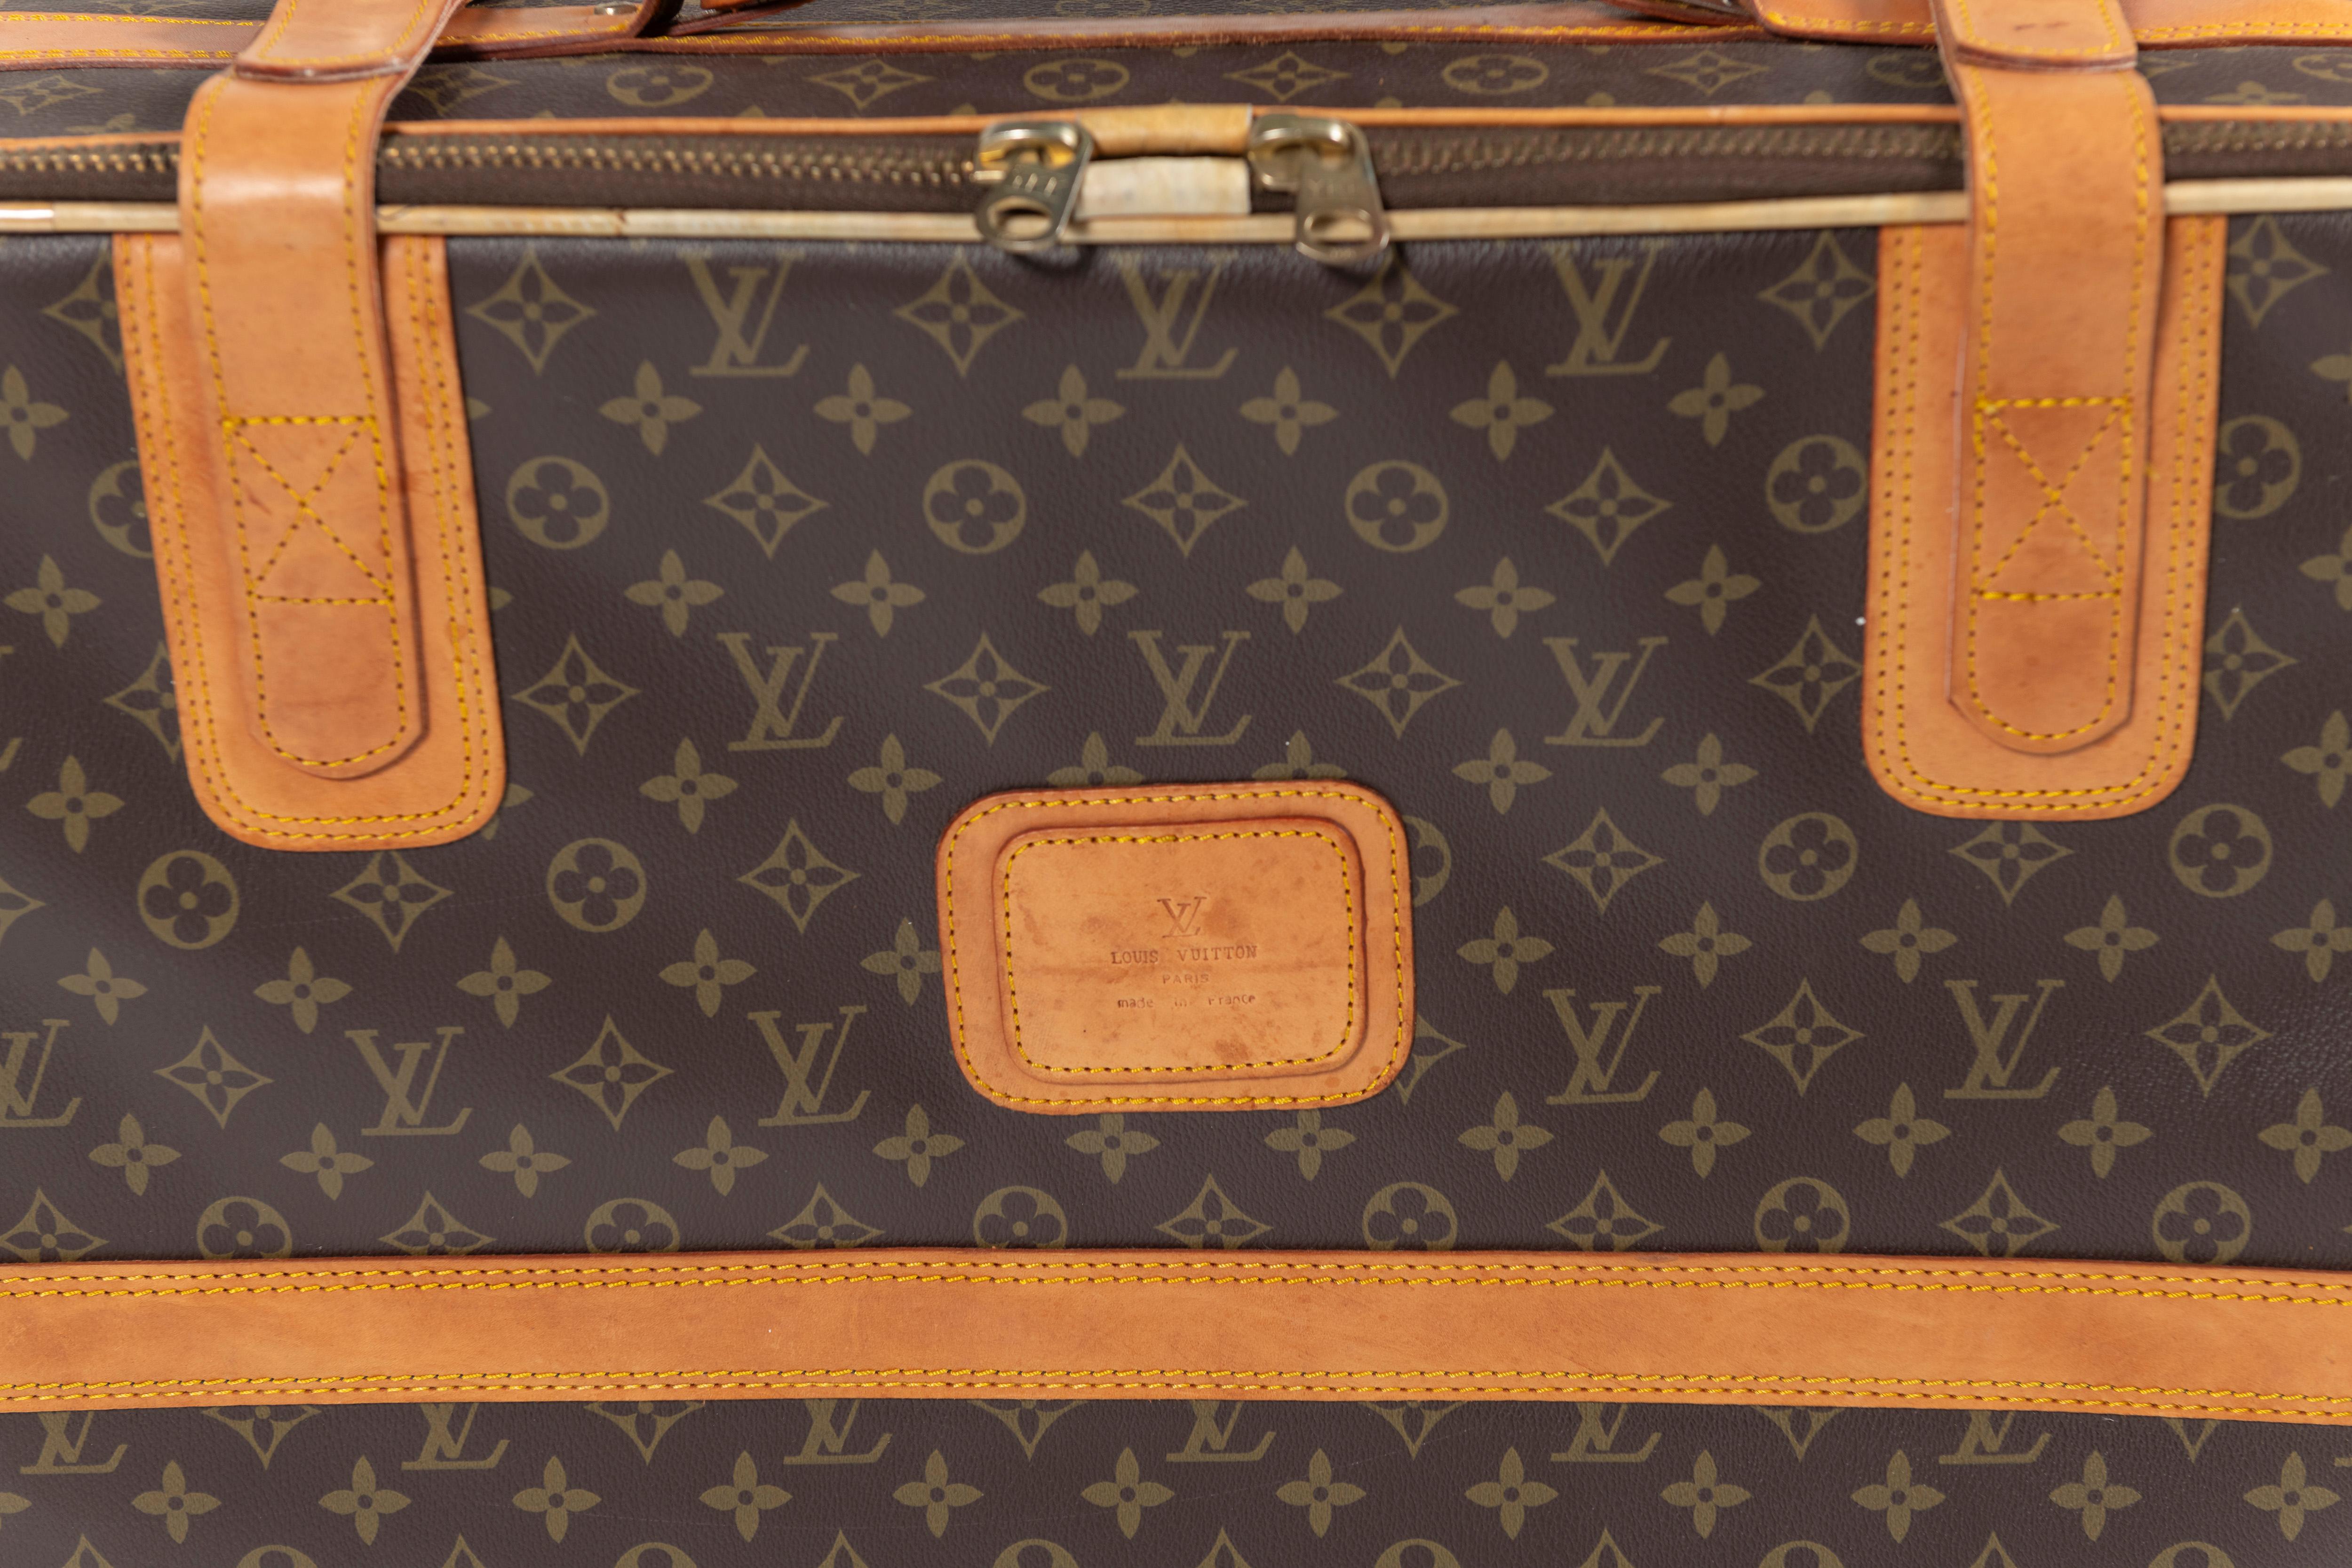 Brass Vintage Louis Vuitton Suitcase, Monogrammed Coated Canvas, Small-Sized For Sale